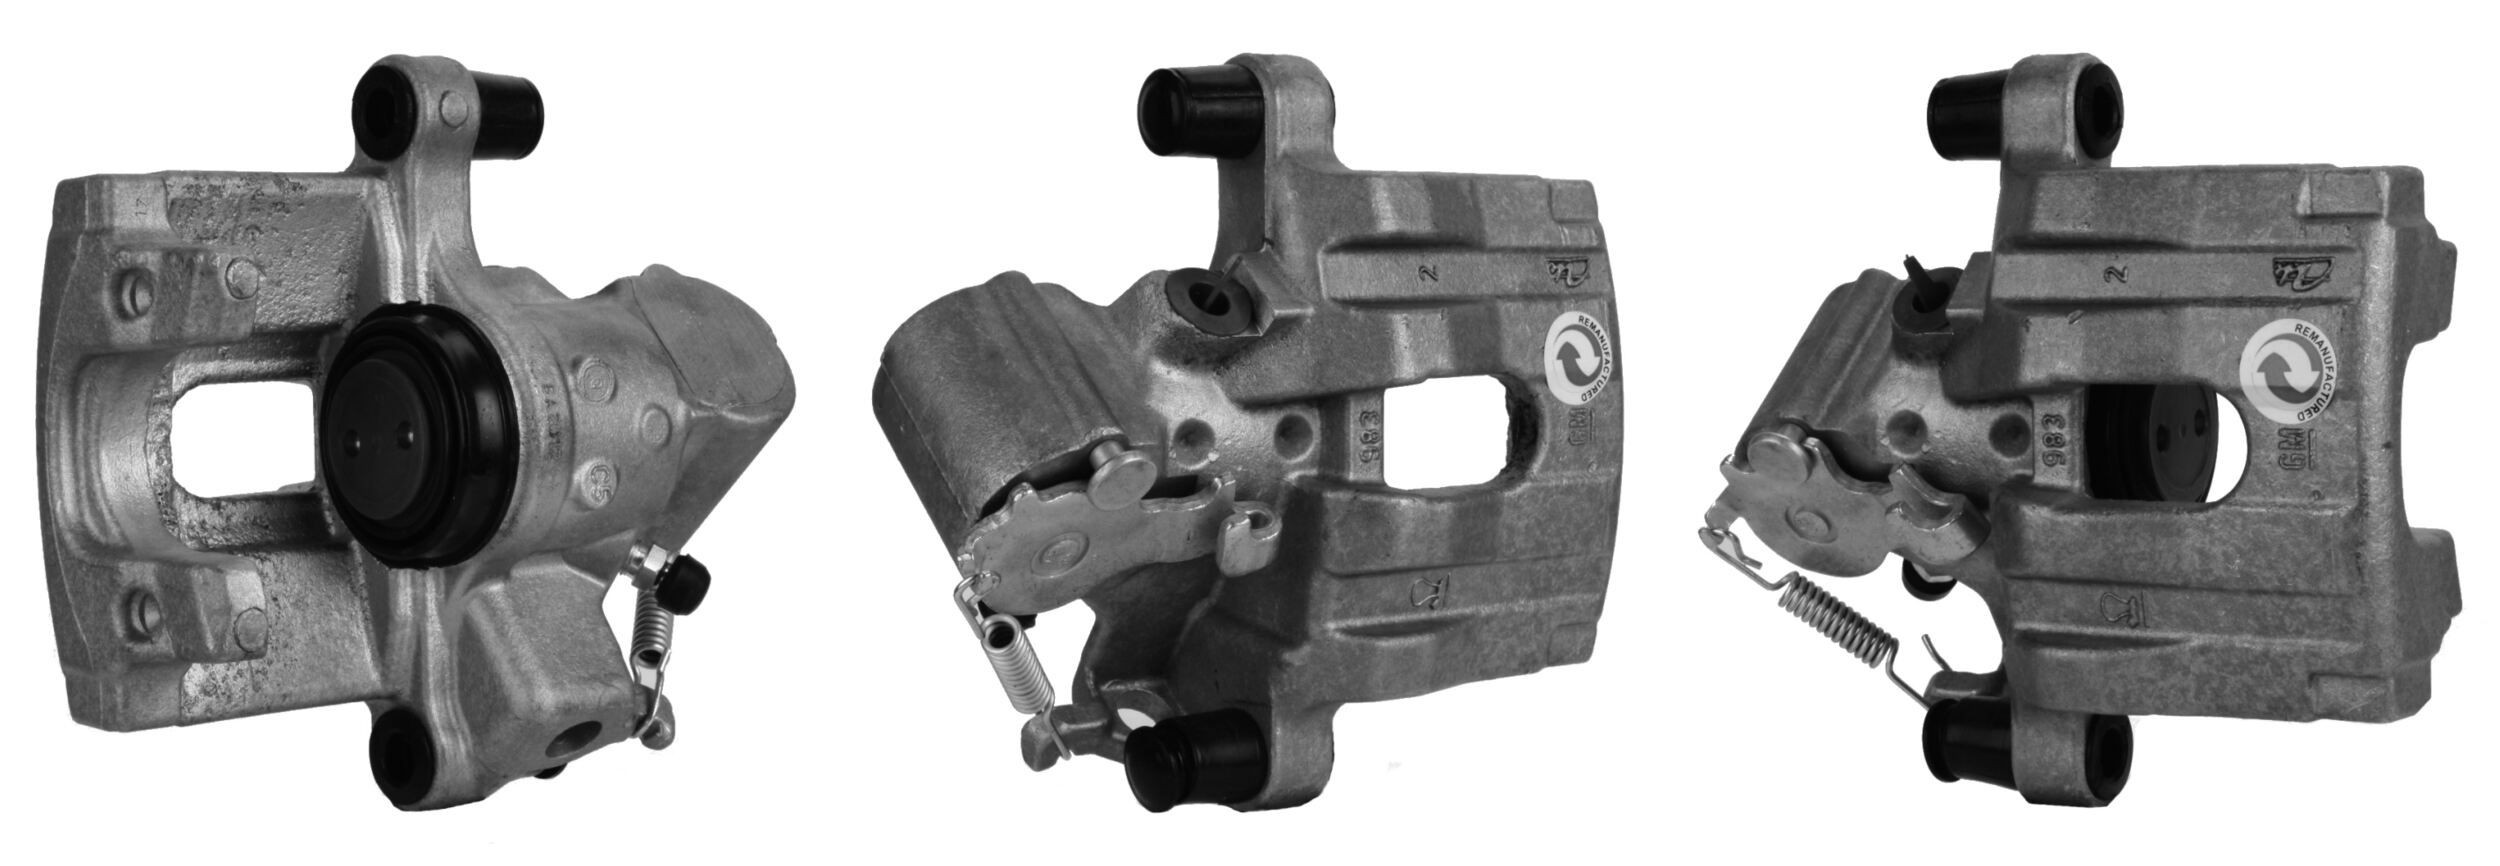 DRI 4185410 Brake caliper Aluminium, Rear Axle Left, behind the axle, for vehicles without sports package